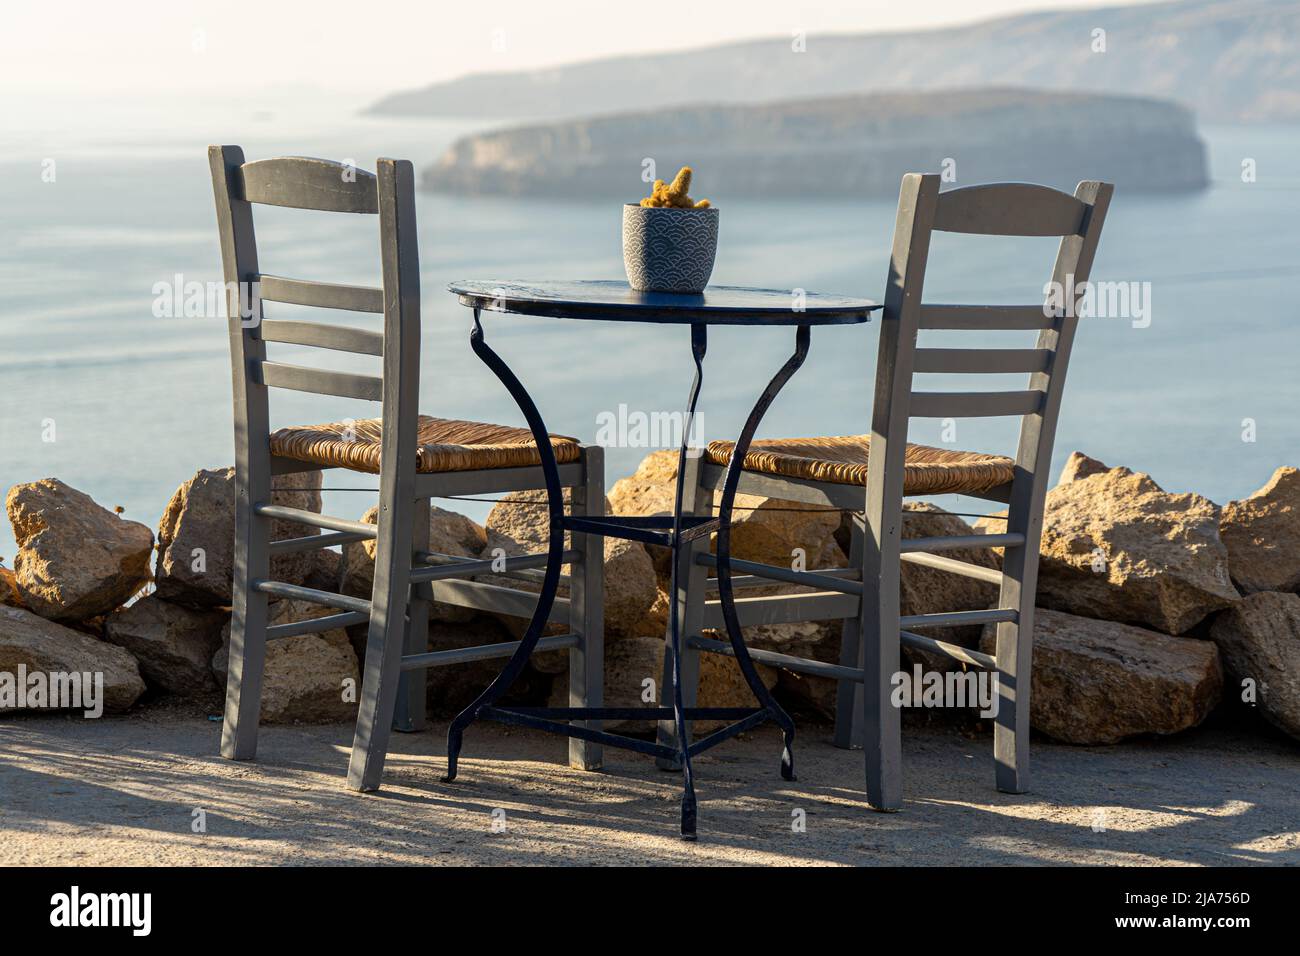 A place with a view: A single table with two chairs occupies a place with a stunning view of Santorini's caldera in the late afternoon light Stock Photo